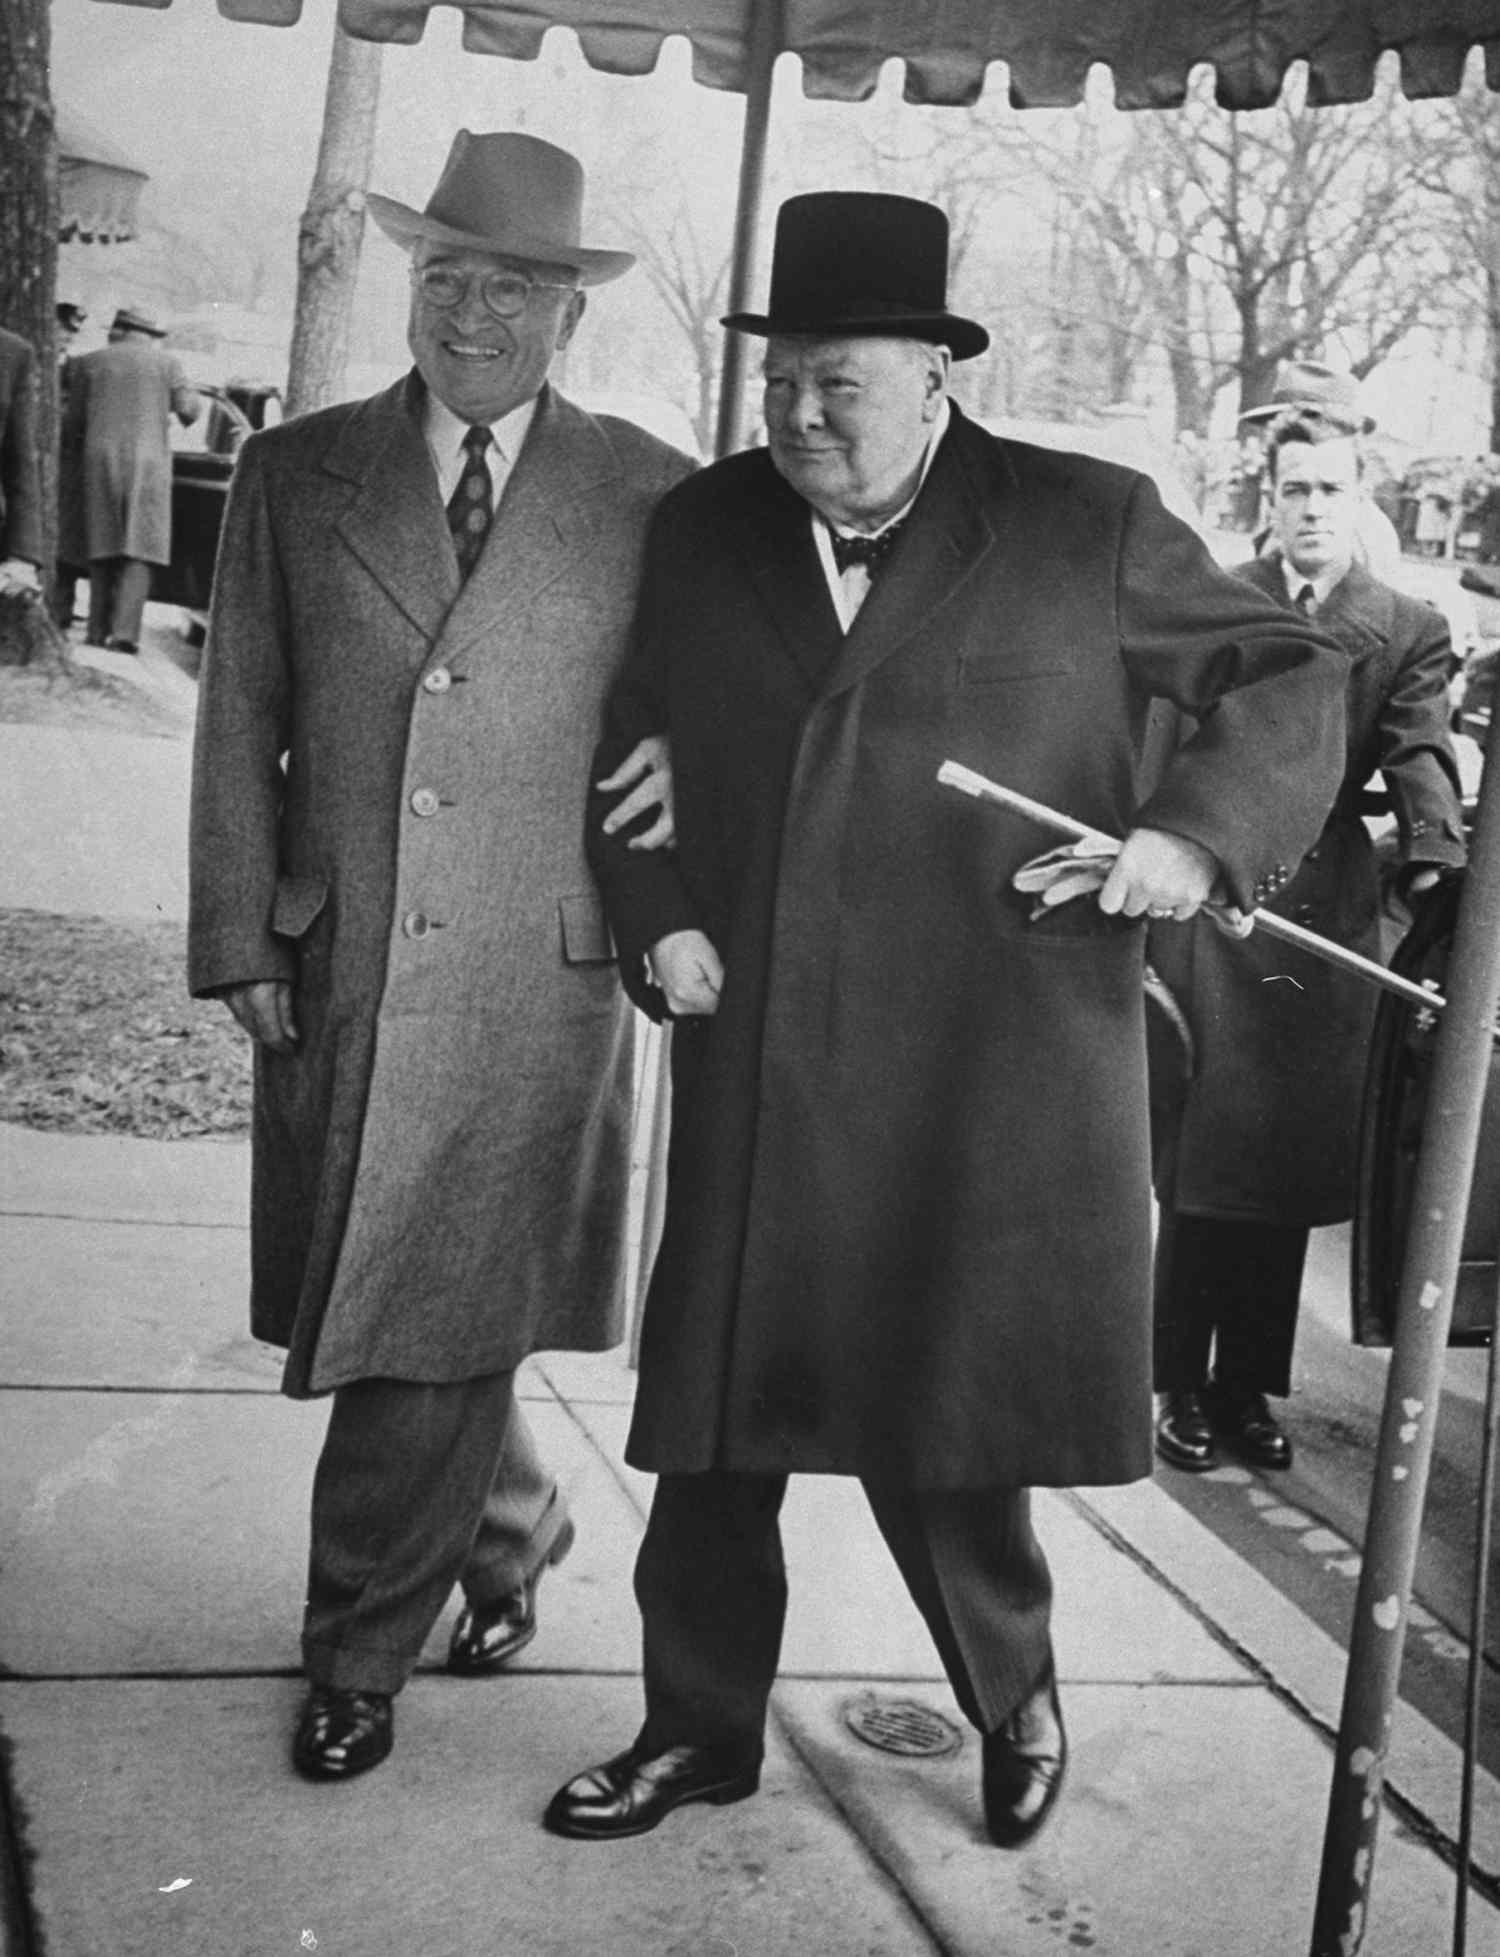 Pres. Harry Truman walking arm-in-arm w. British Prime Minister Winston Churchill as he arrives at Blair House for his visit to discuss foreign affairs